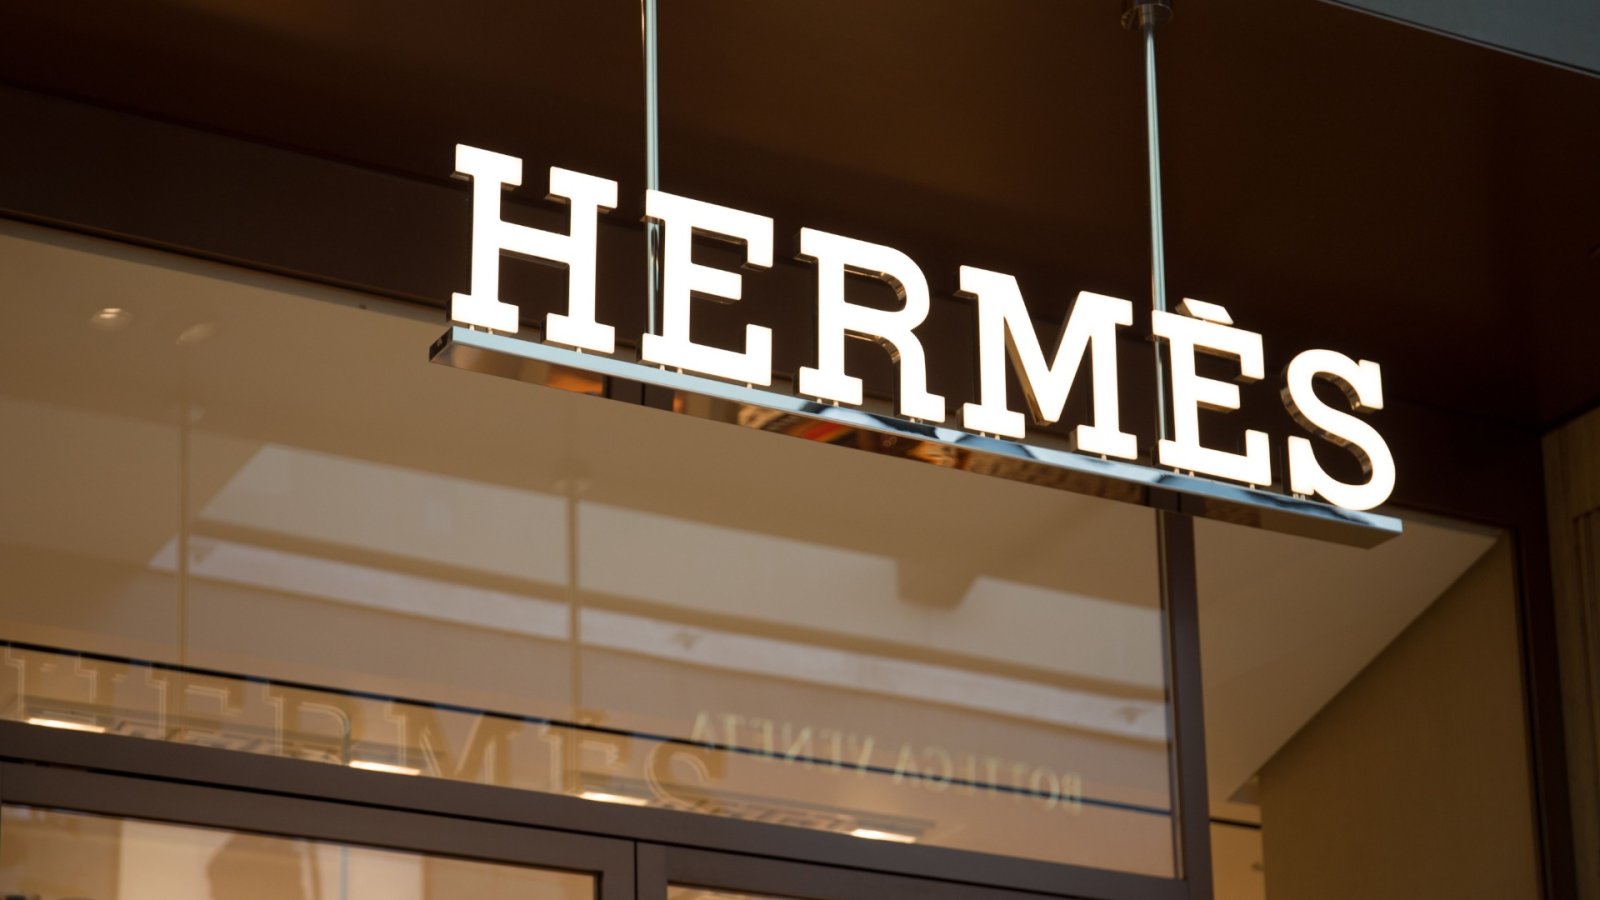 Hermès makes watches now - what are the collectors saying?